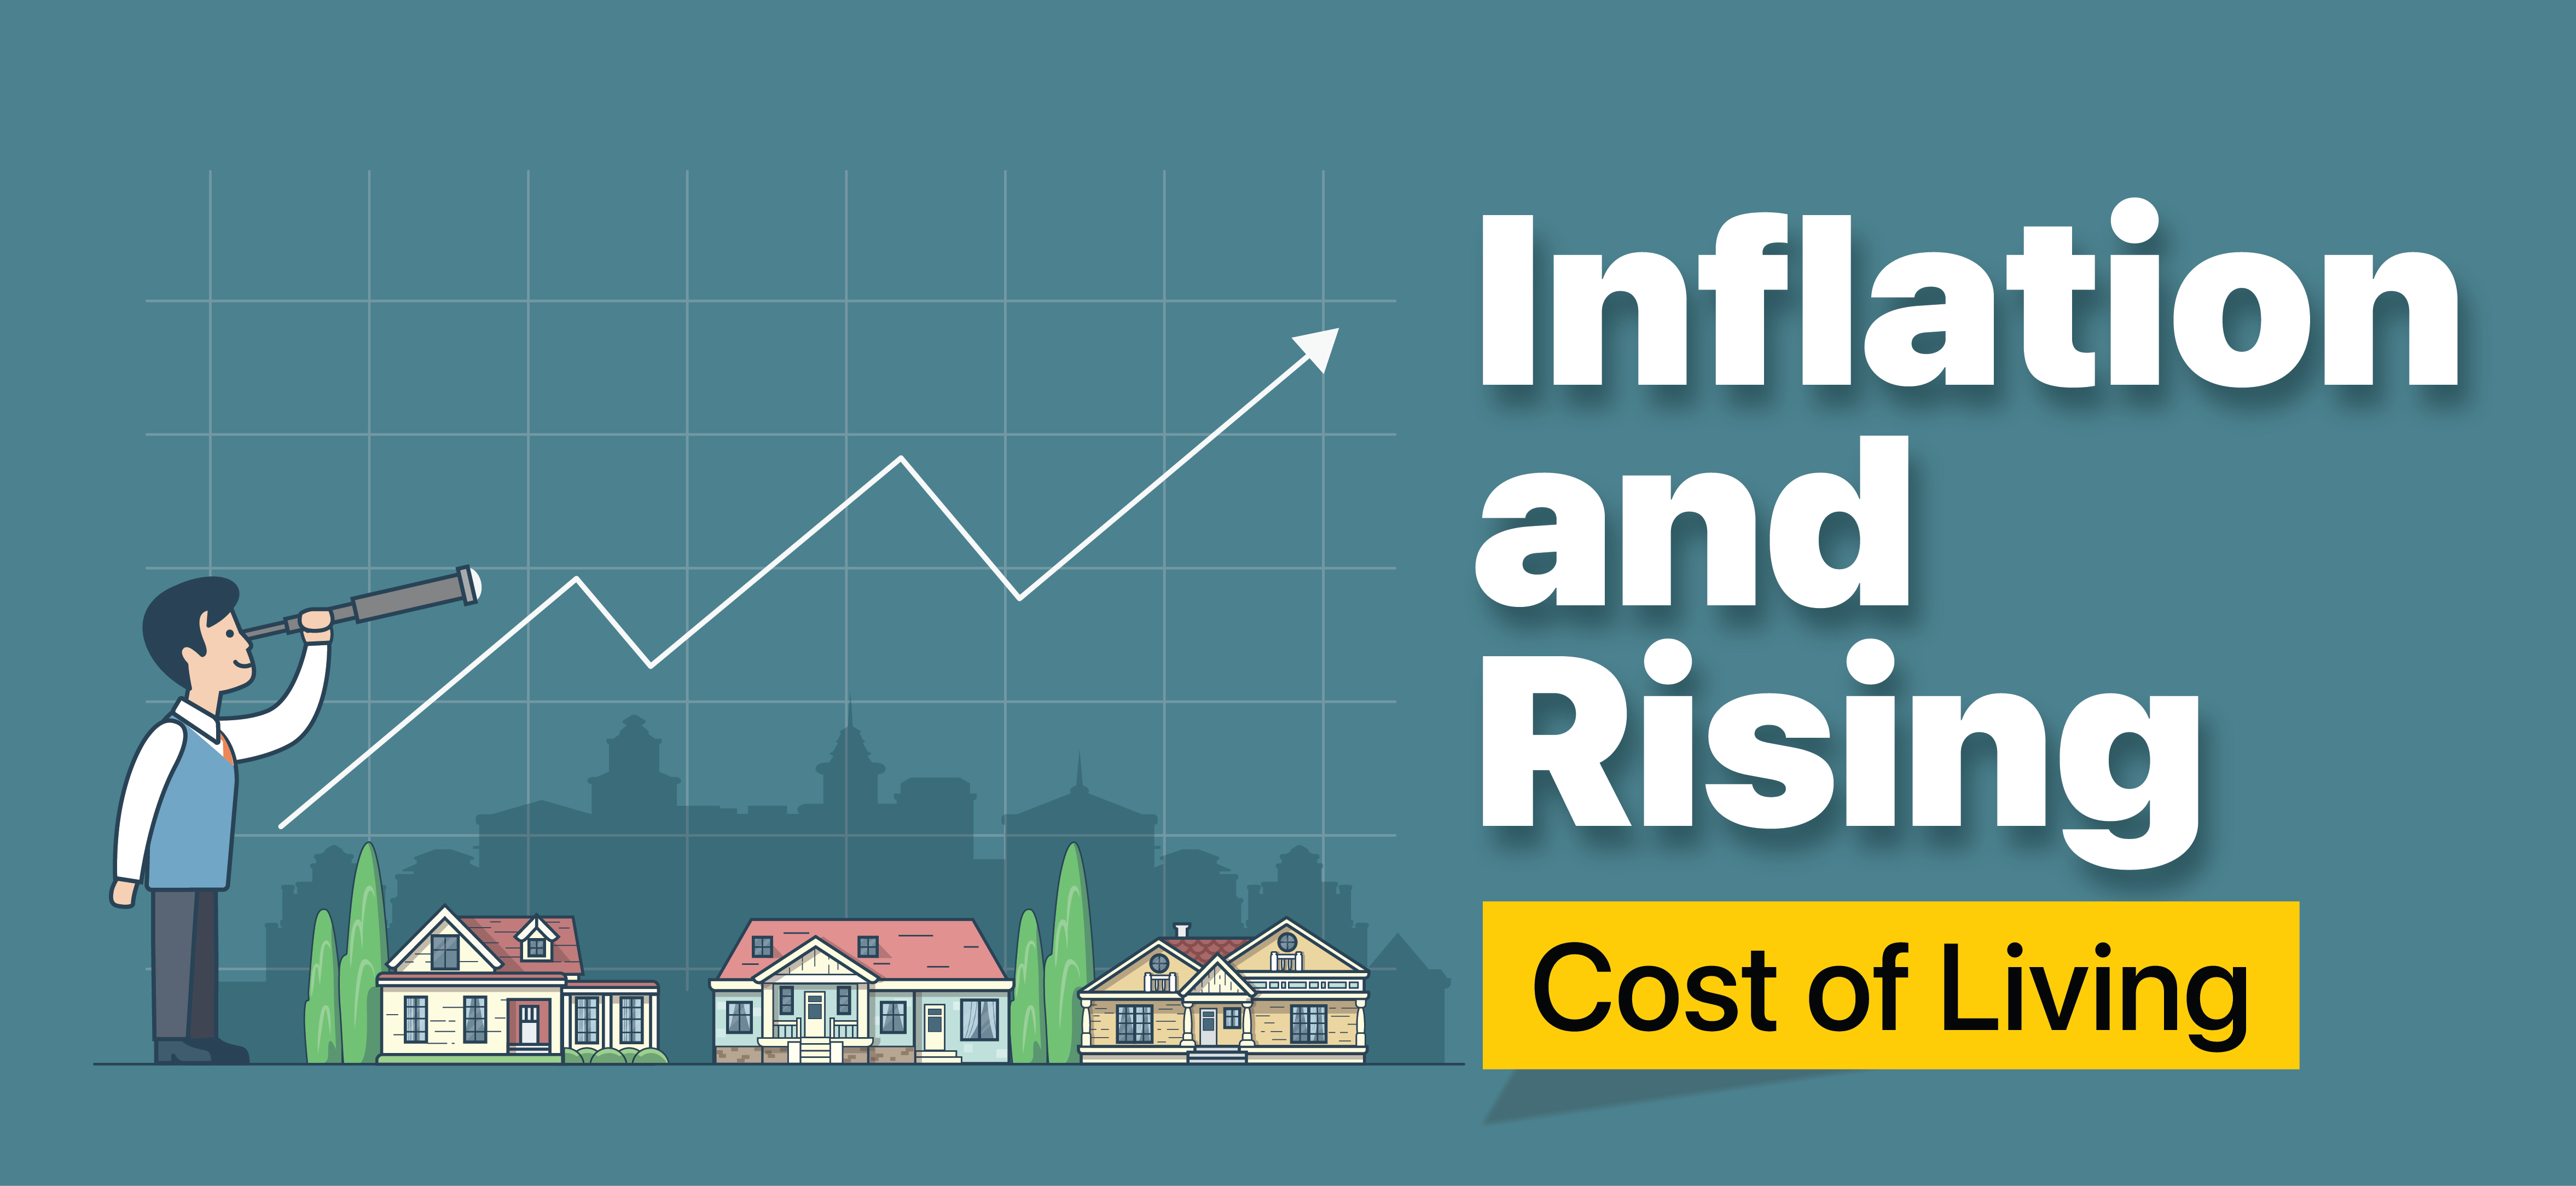 https://www.drishtiias.com/images/blogs/Inflation-and-Rising-Cost-of-Living-02.jpg